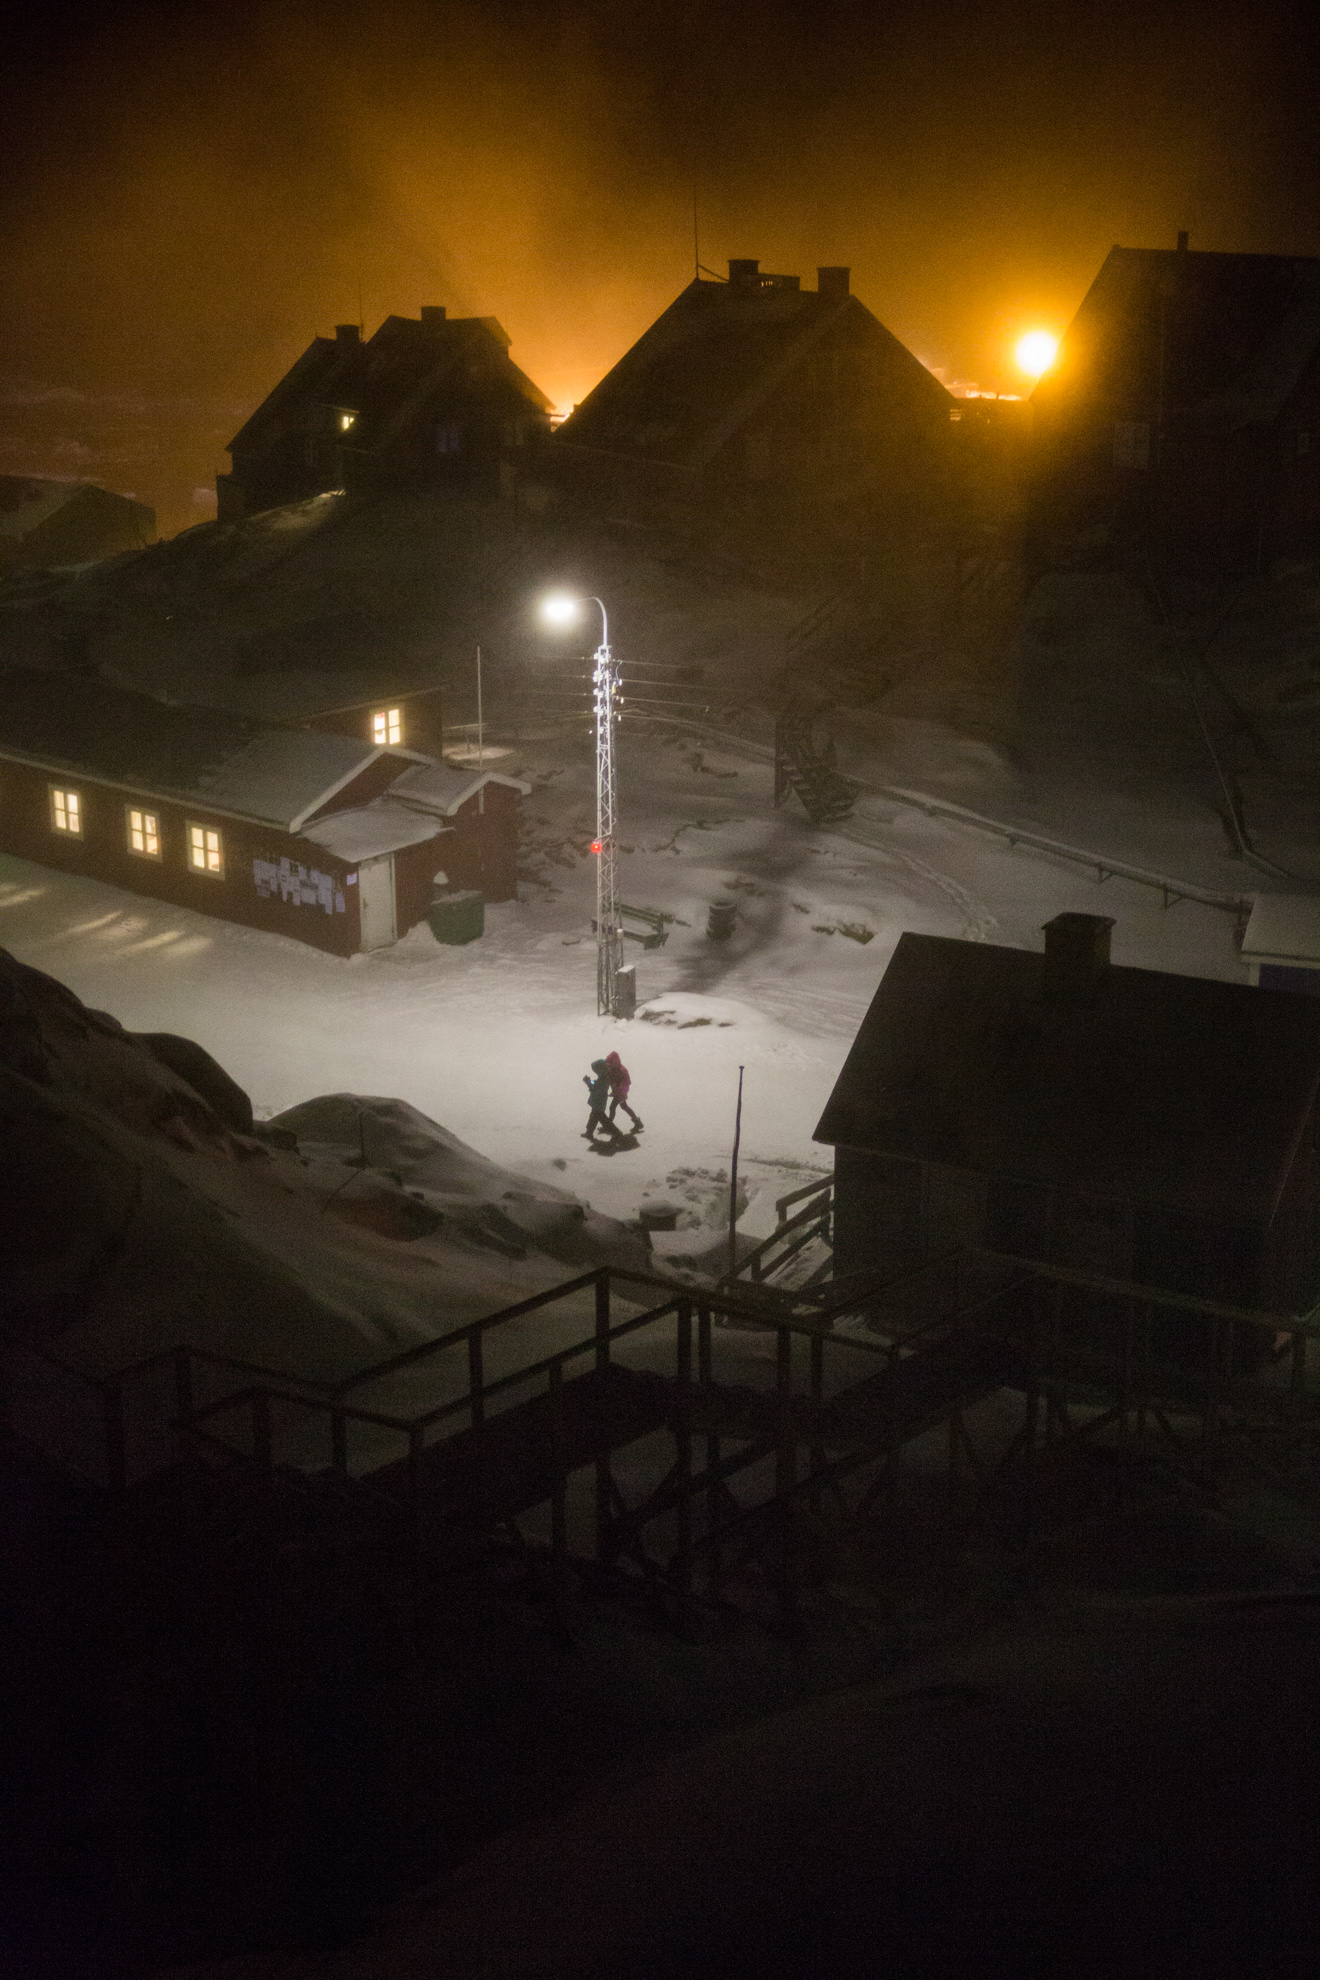  A harsh life in a harsh town: There is no cinema in Uummannaq, no shopping mall and no road outside the town. 